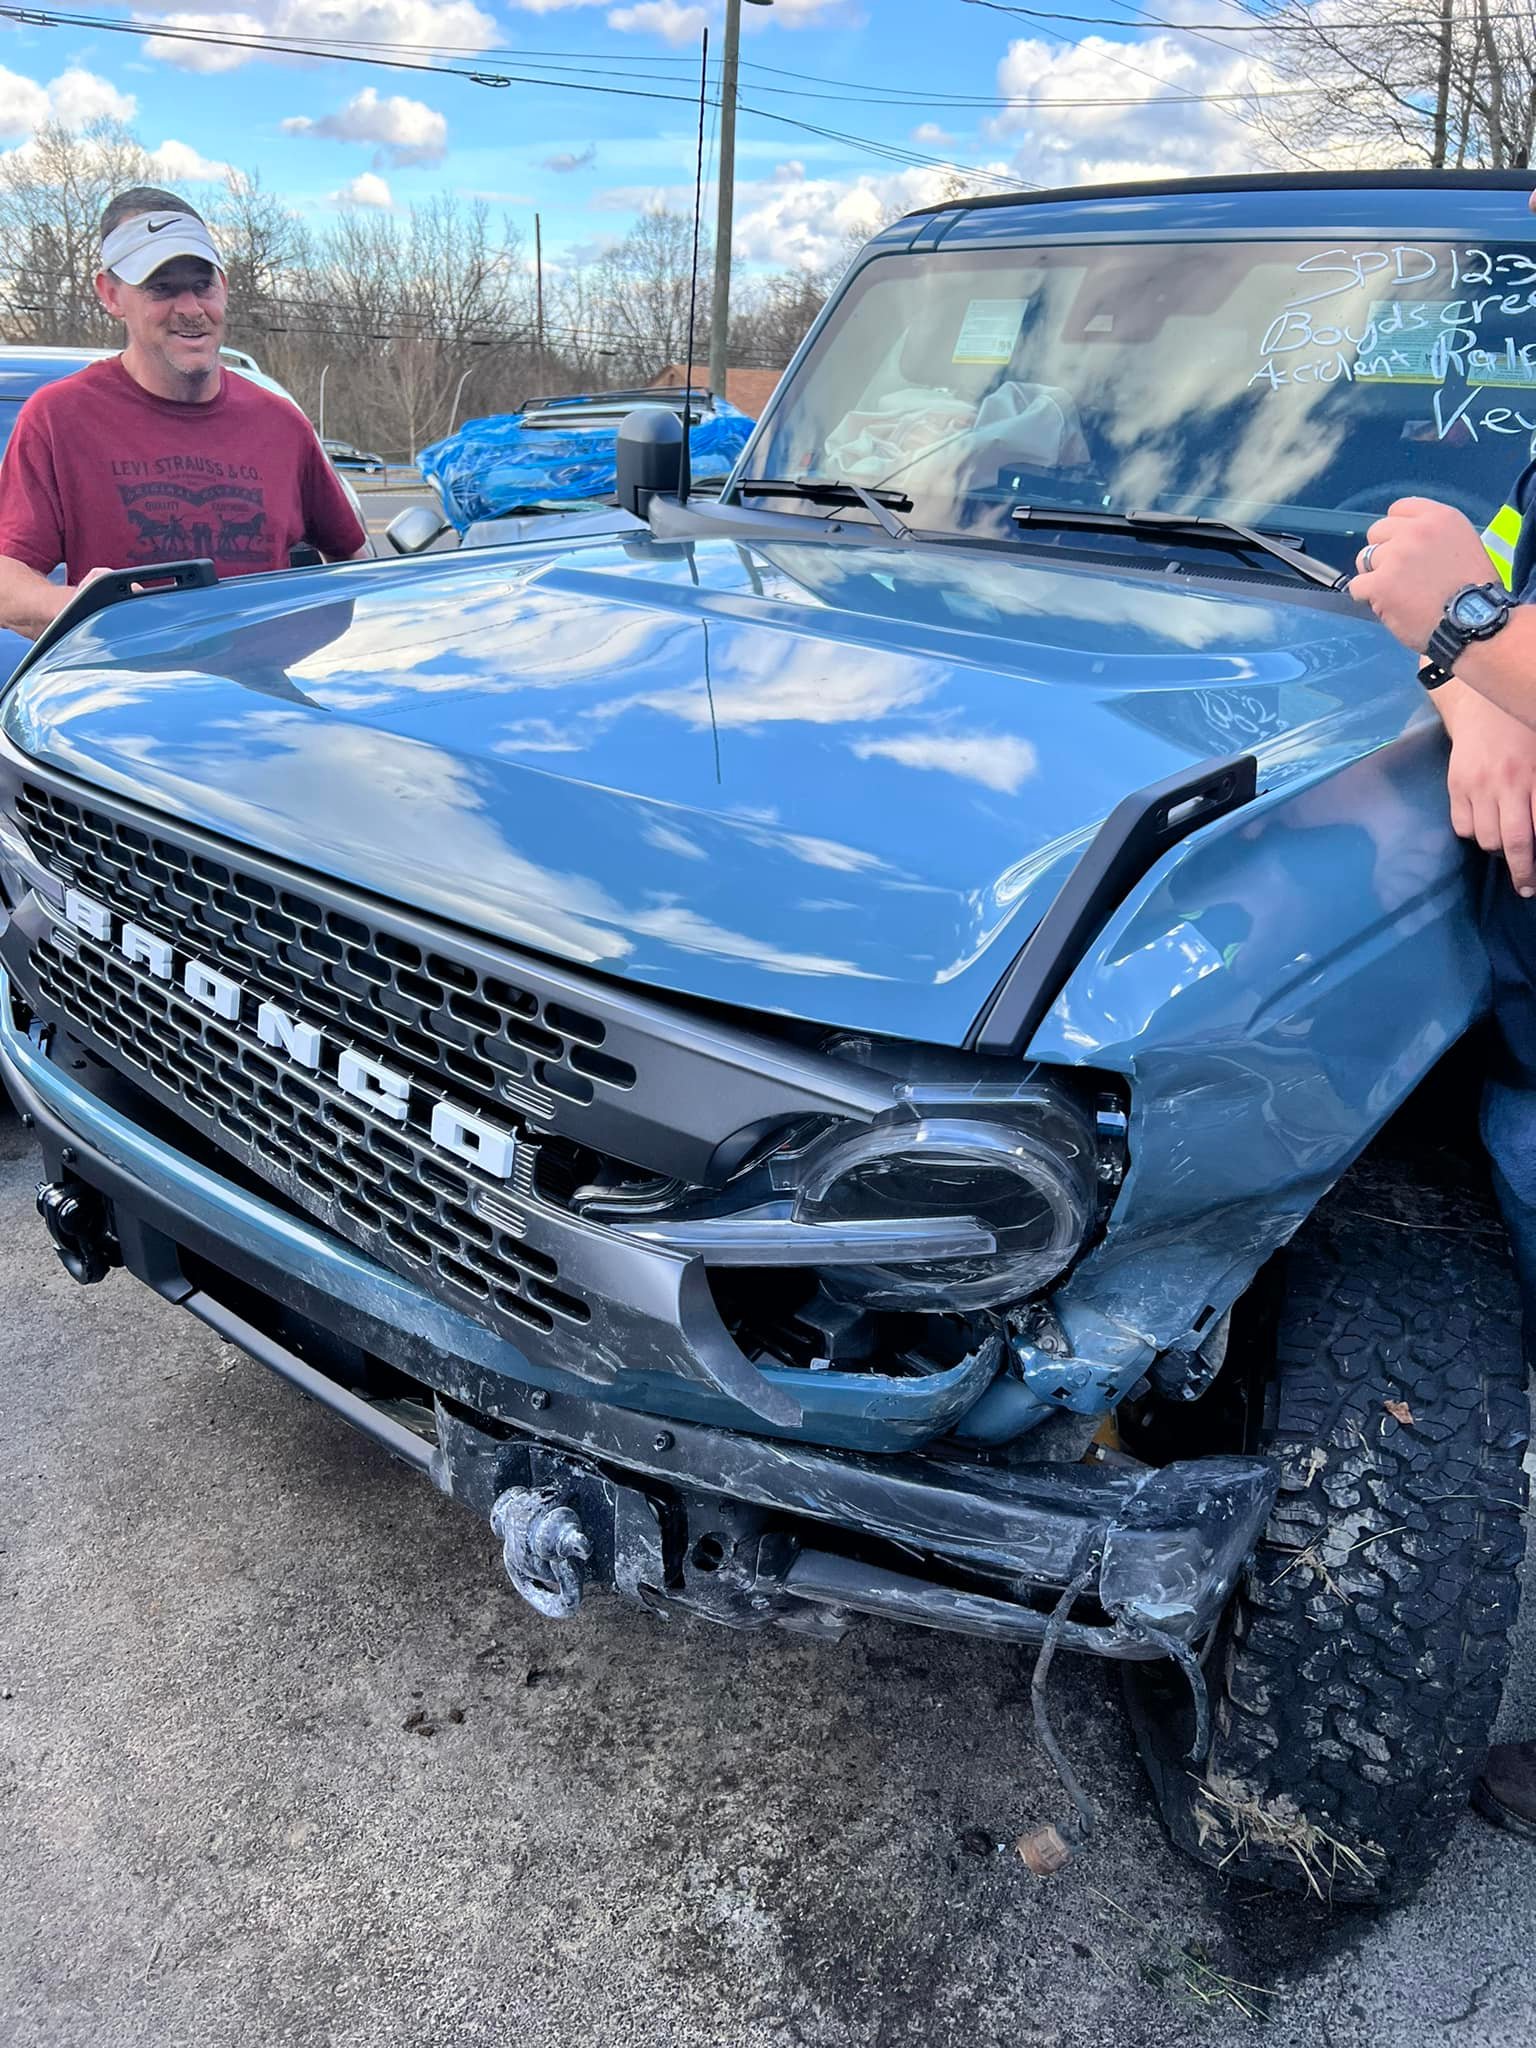 Ford Bronco Bronco totaled in head-on collision accident, but you should see the other guy! [Updates From Owner] 271176800_10224439969445615_7516300617103994641_n